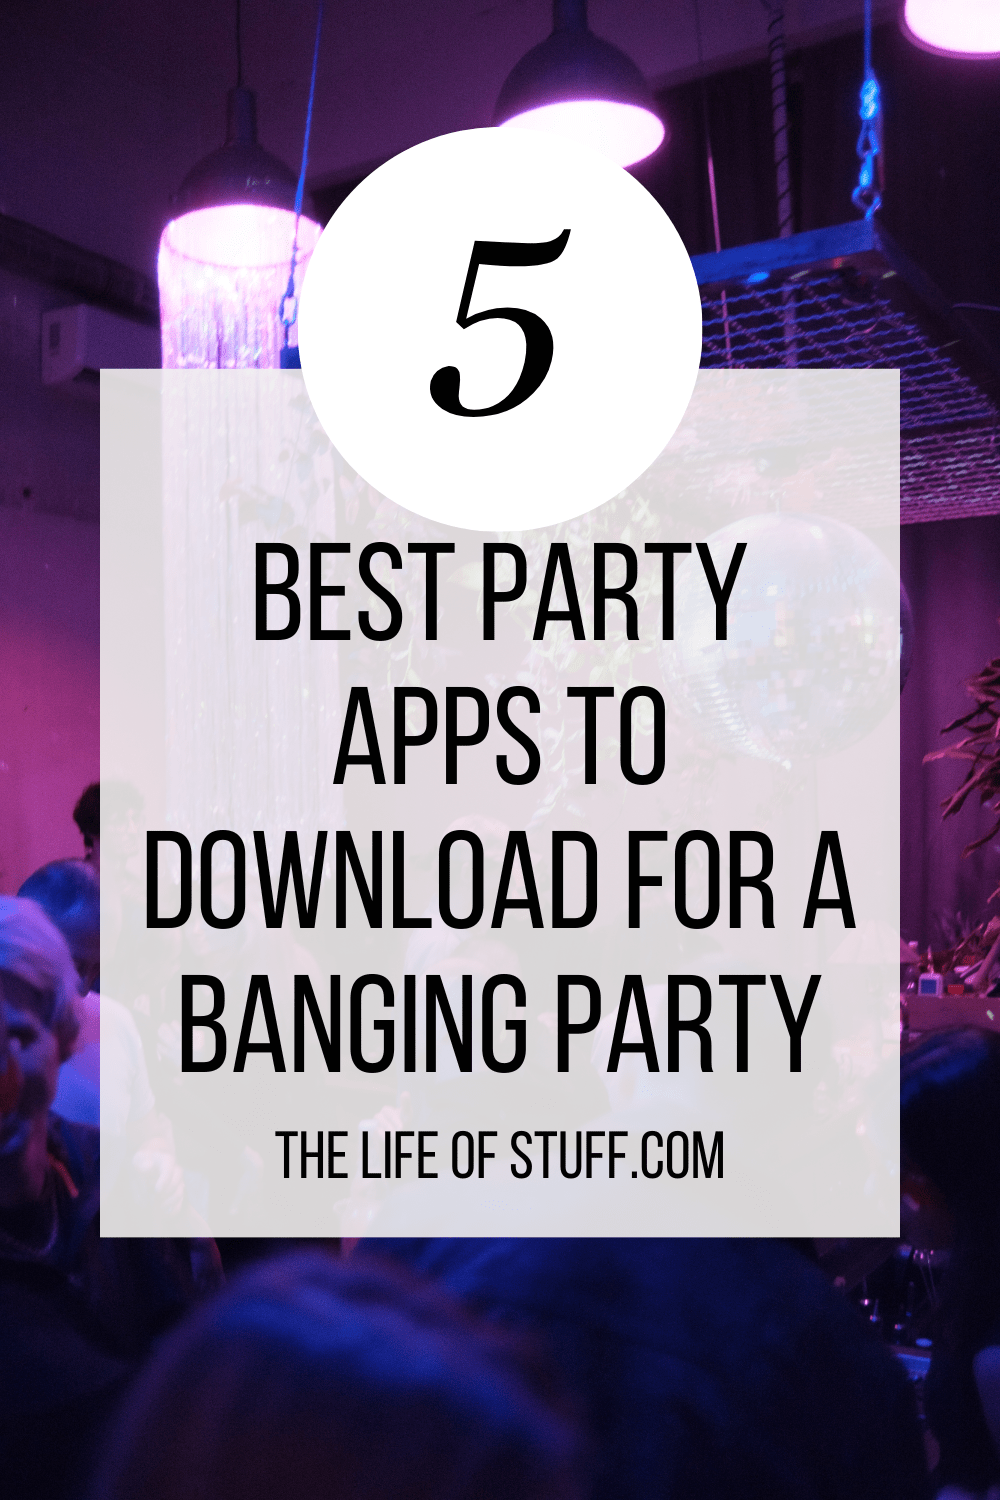 Best Party Apps to Download for a Banging Party - The Life of Stuff